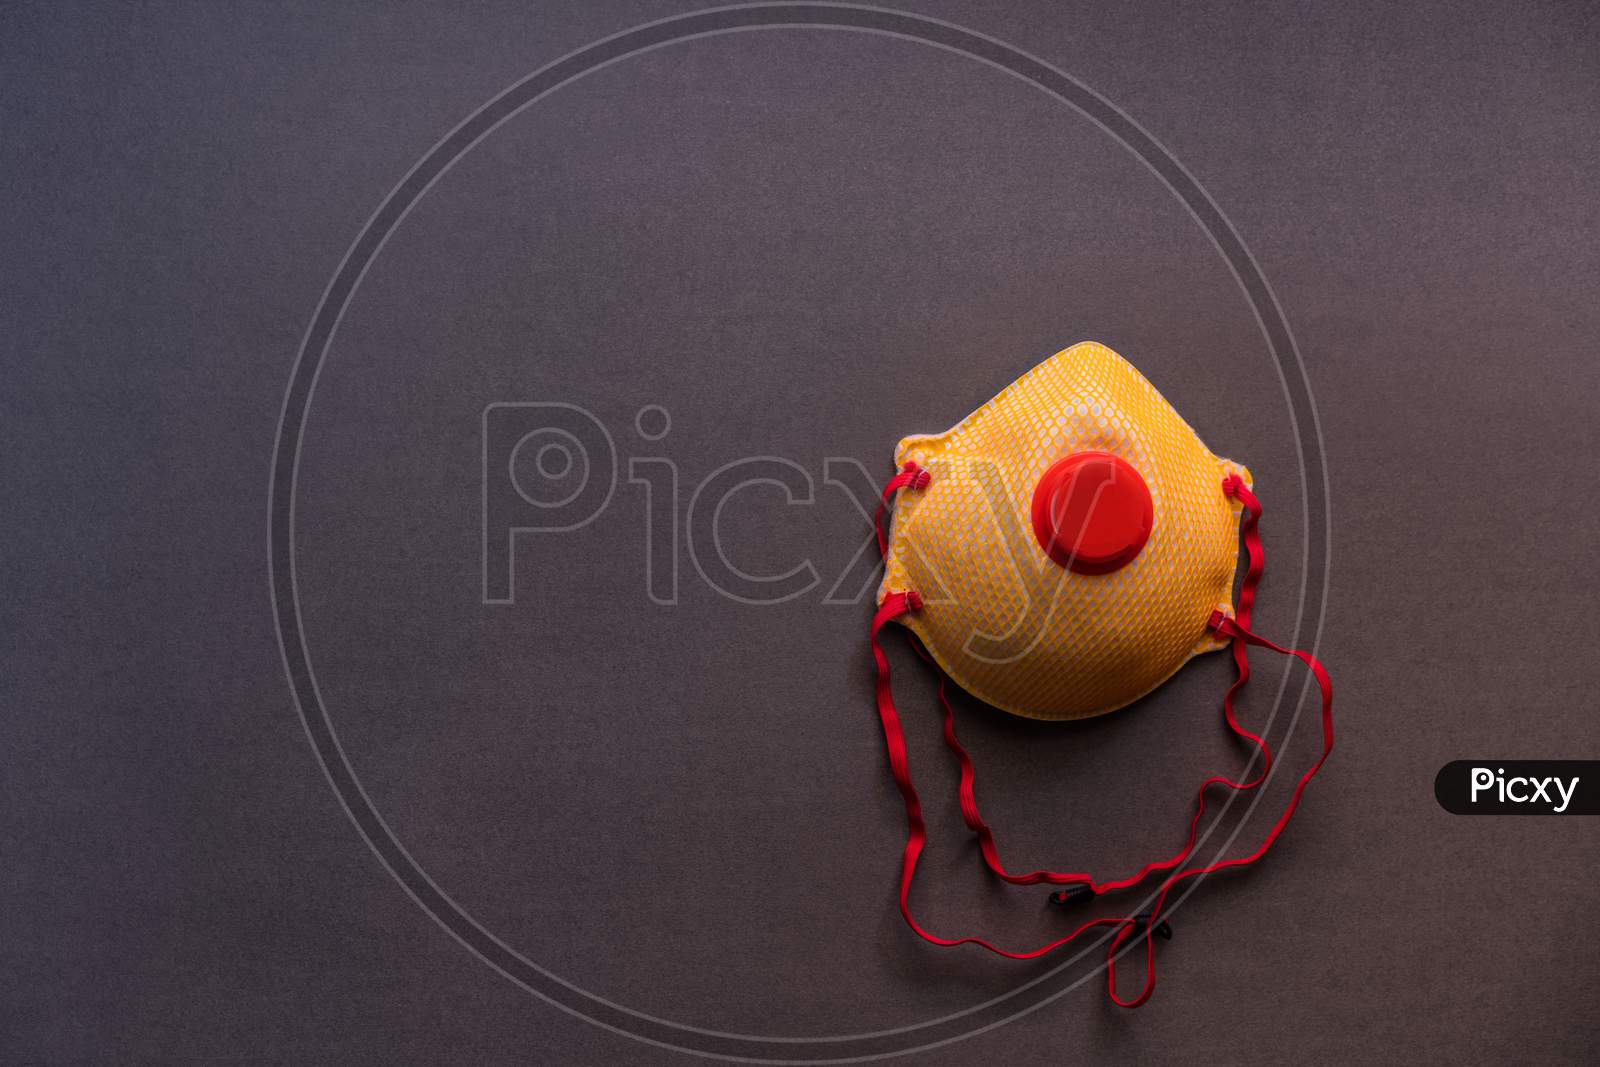 Top view of ffp2 respirator mask isolated on a grey background